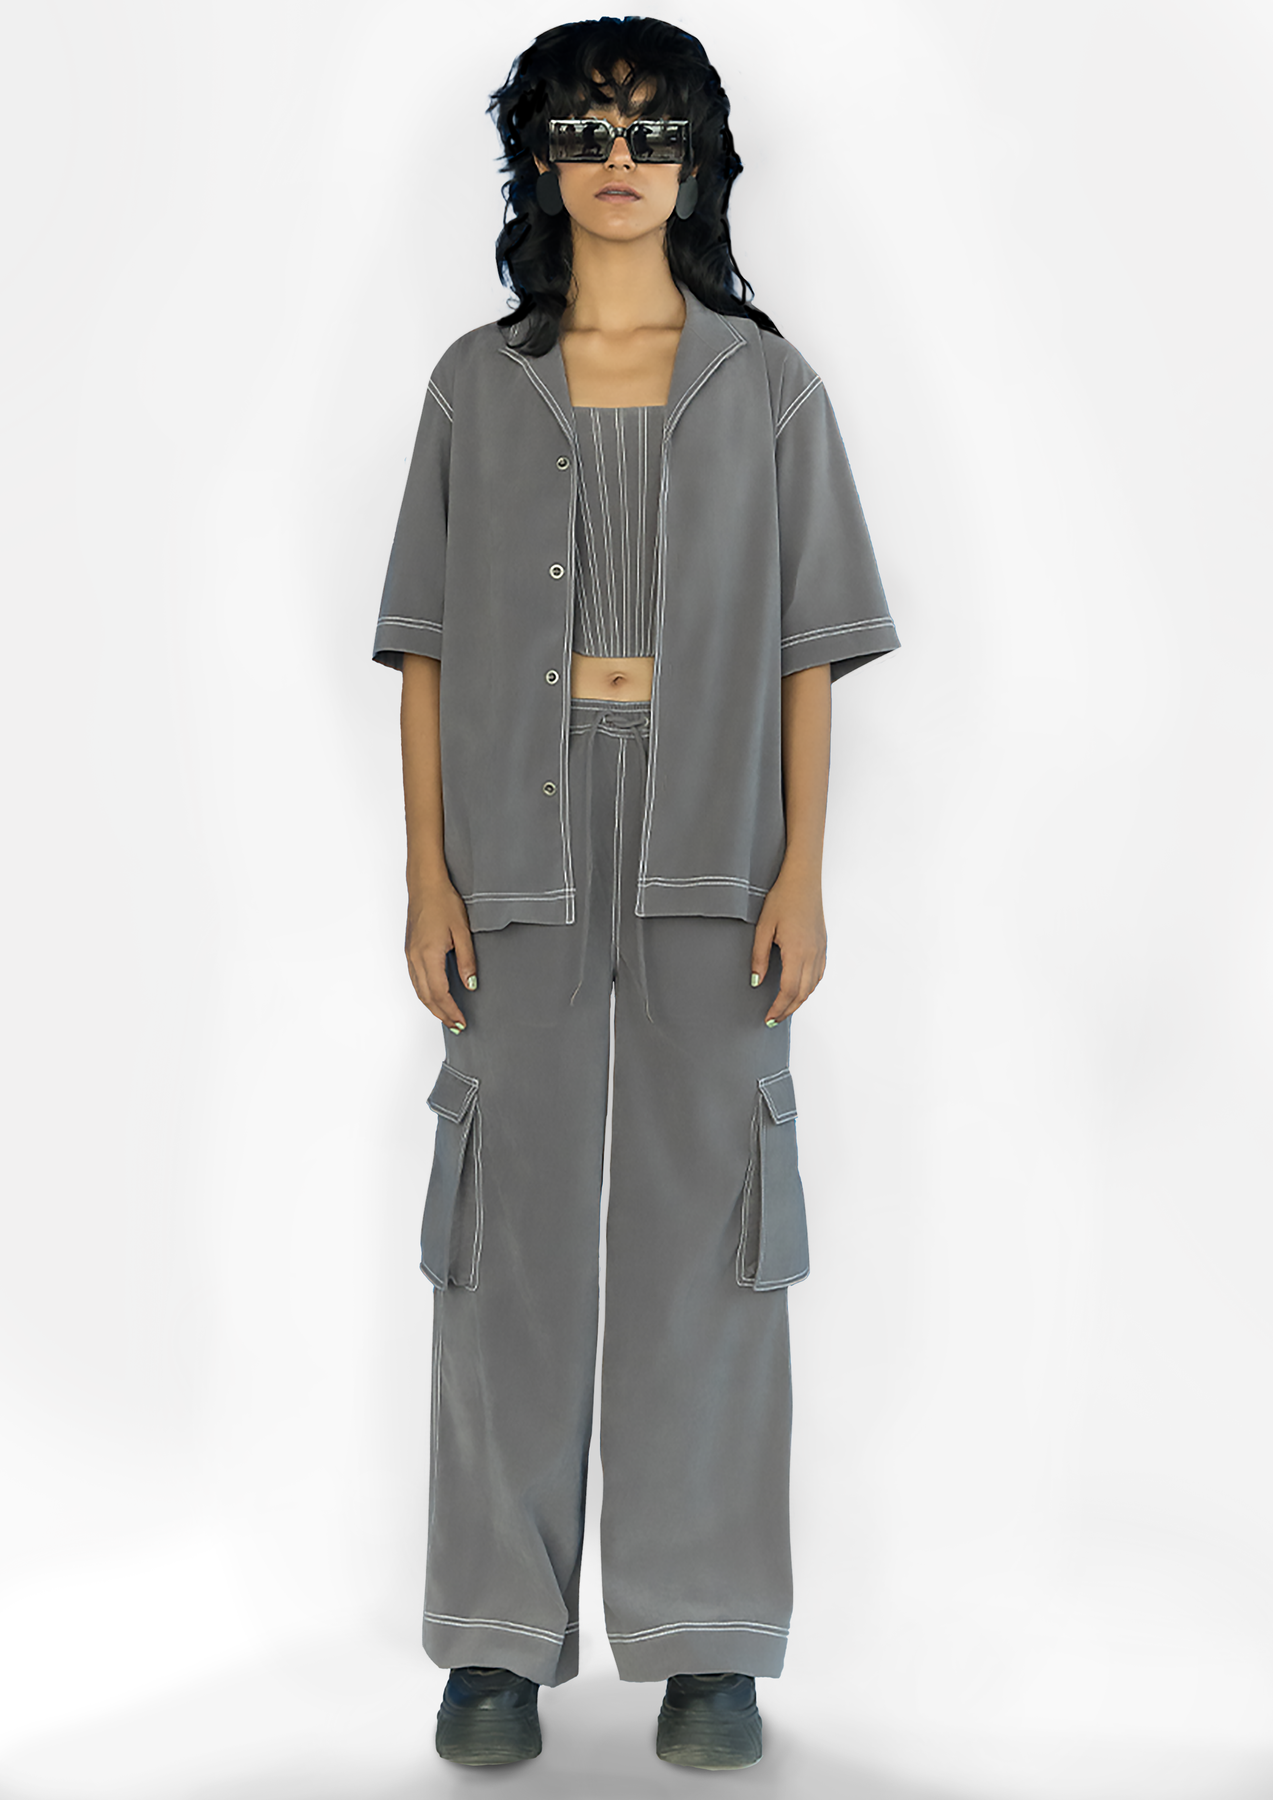 PATTHAR CO-ORD, a product by Doh tak keh